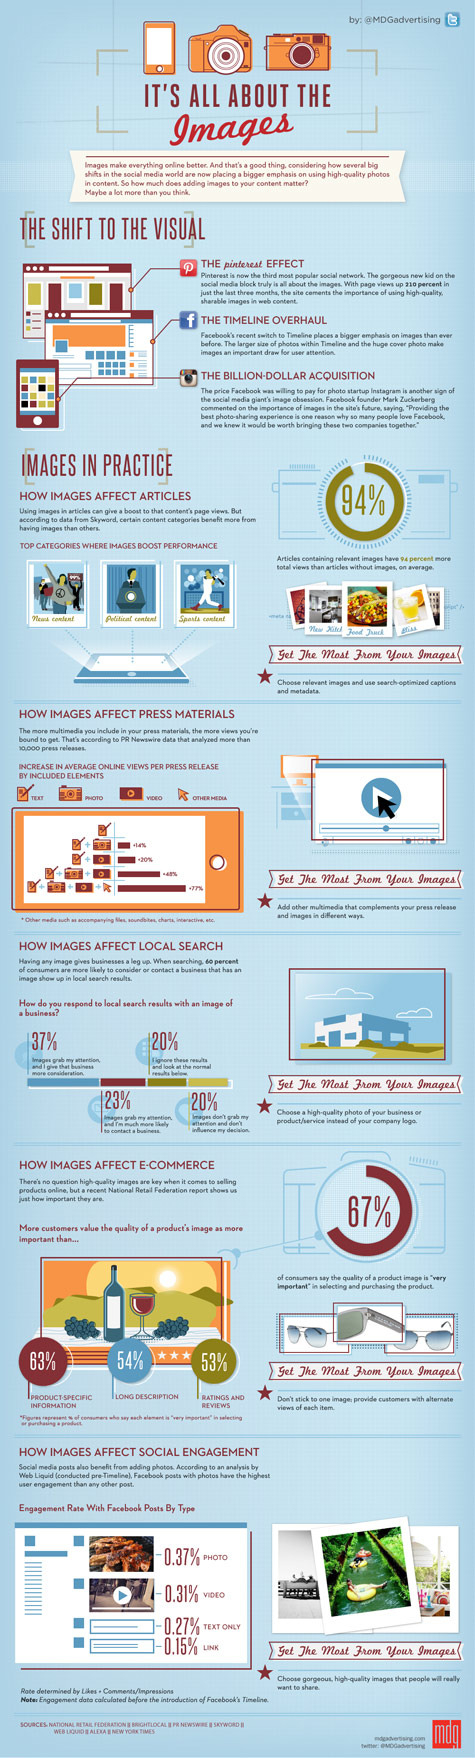 It's All About The Images infographic